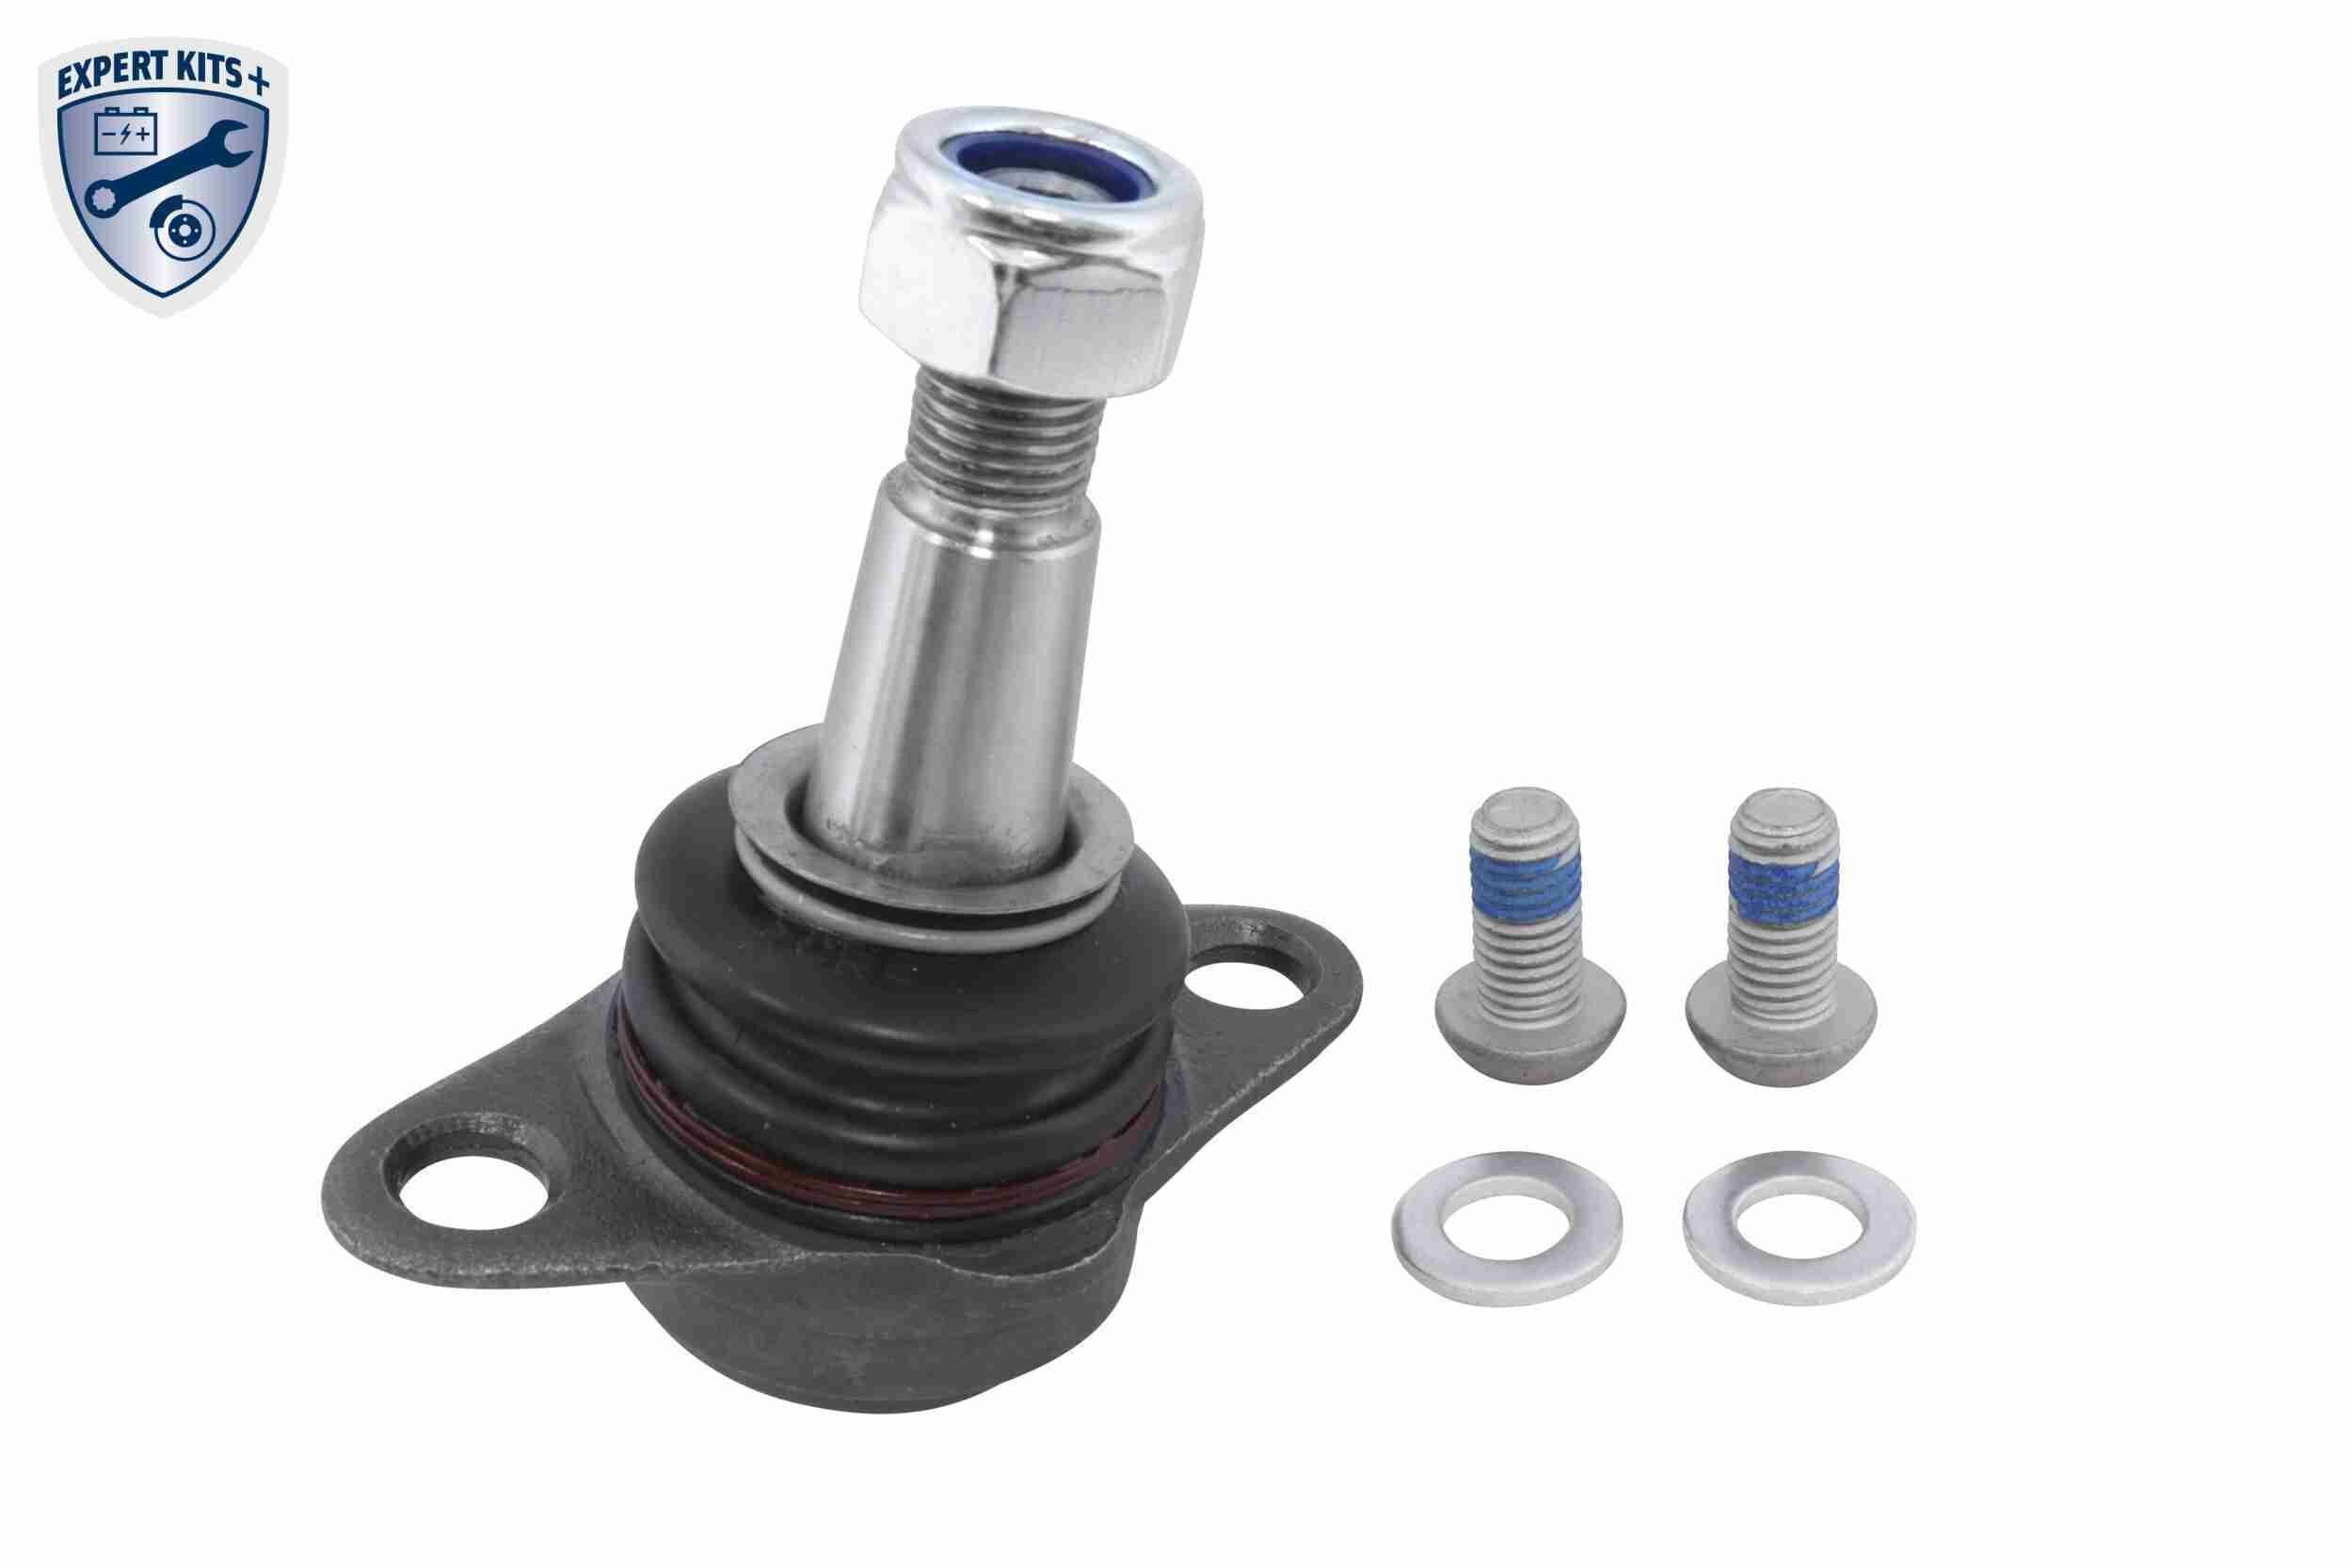 VAICO V20-1417 Ball Joint Front Axle, Lower, EXPERT KITS +, M14 x 1,5mm